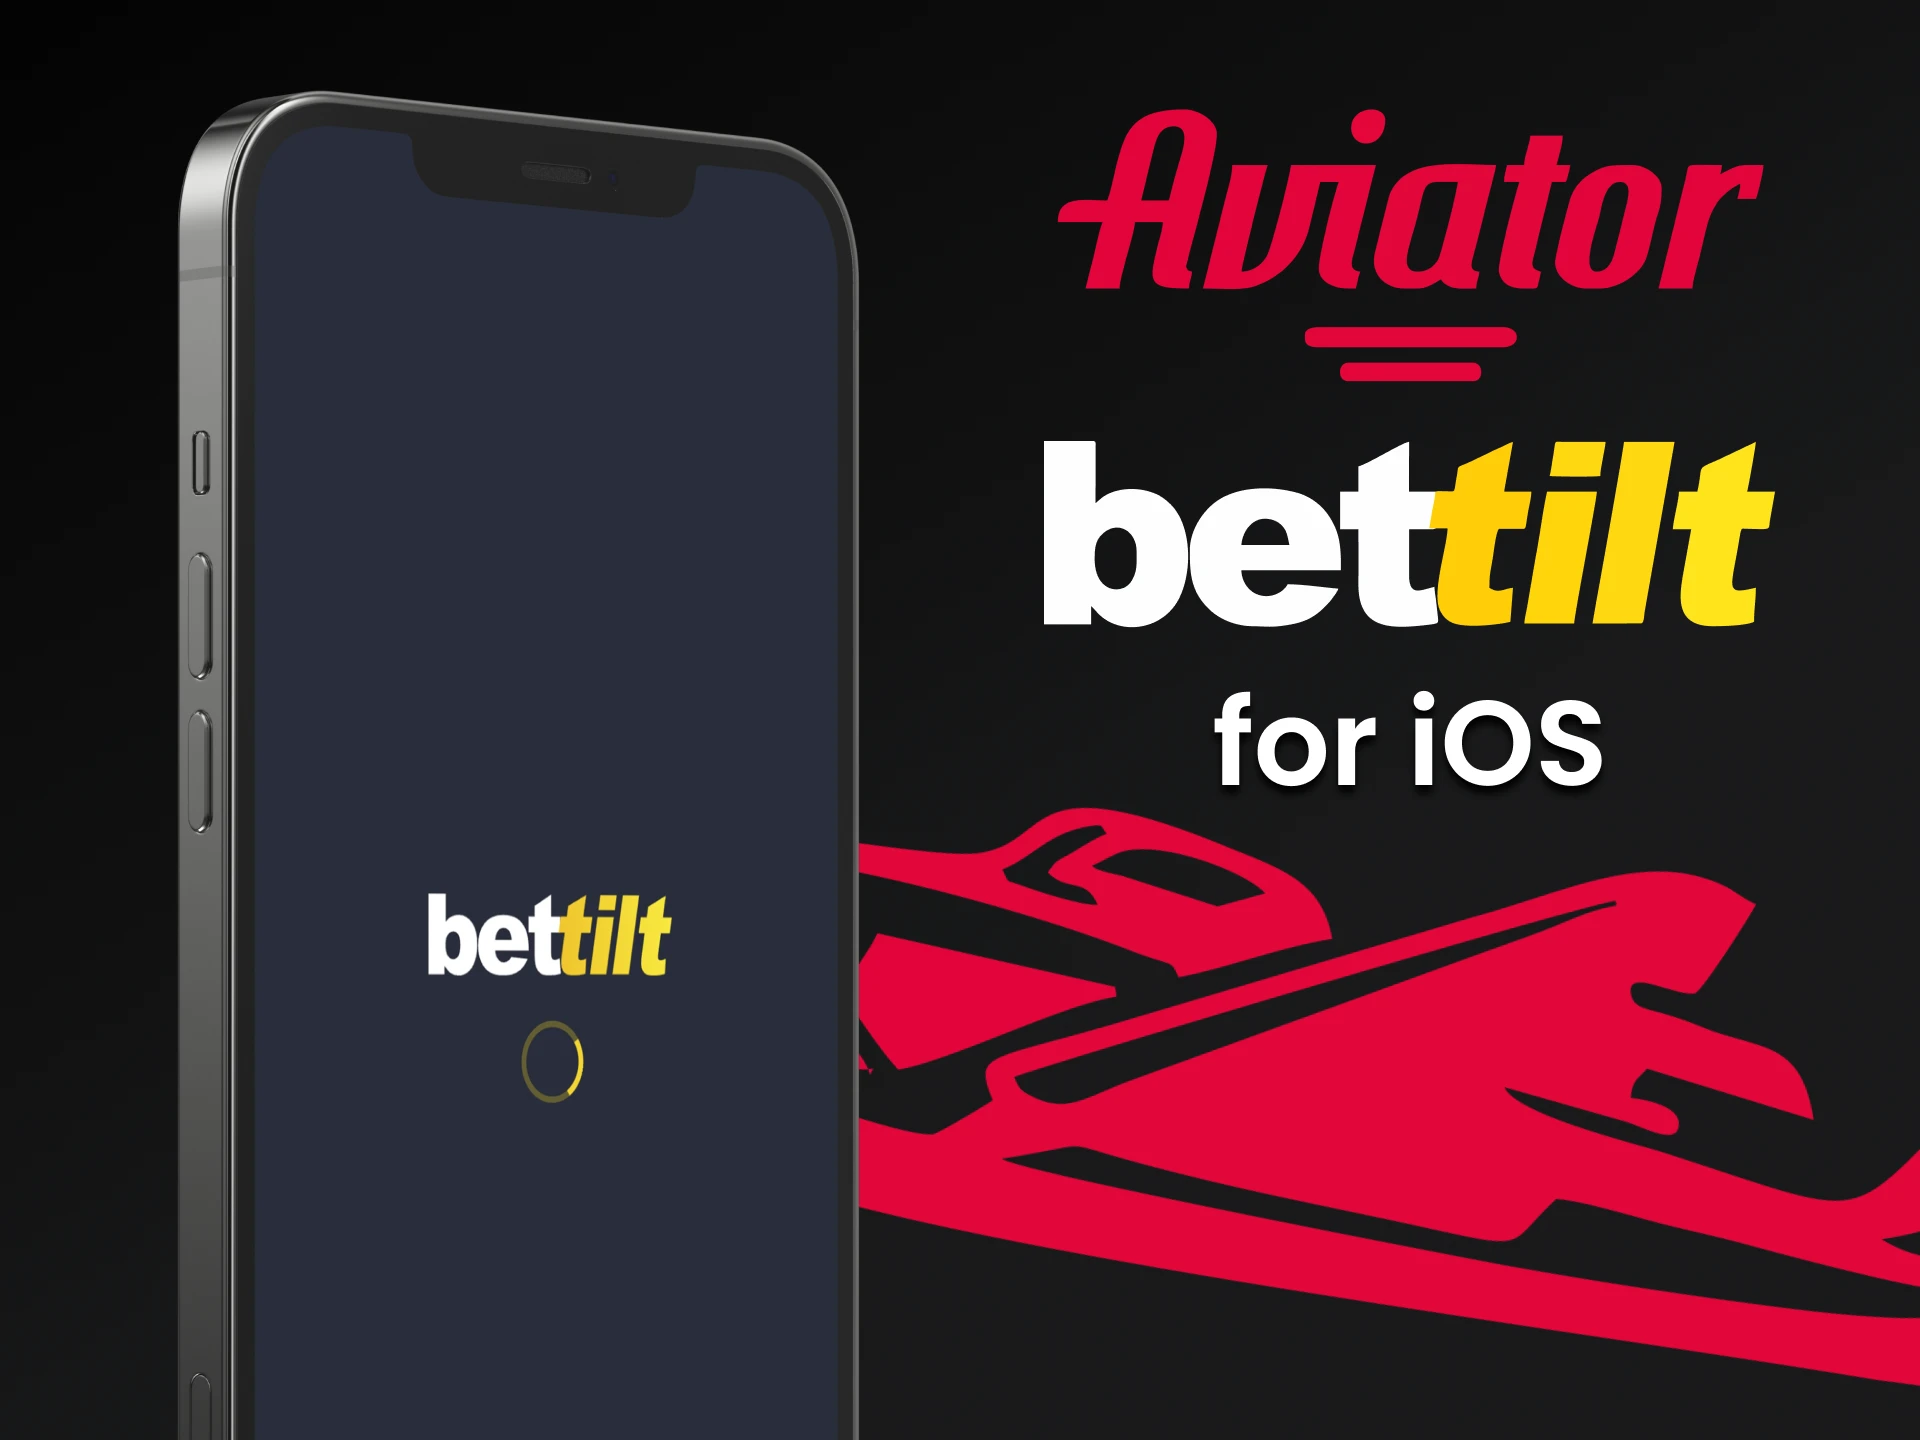 Download the Bettilt app for iOS to play Aviator.